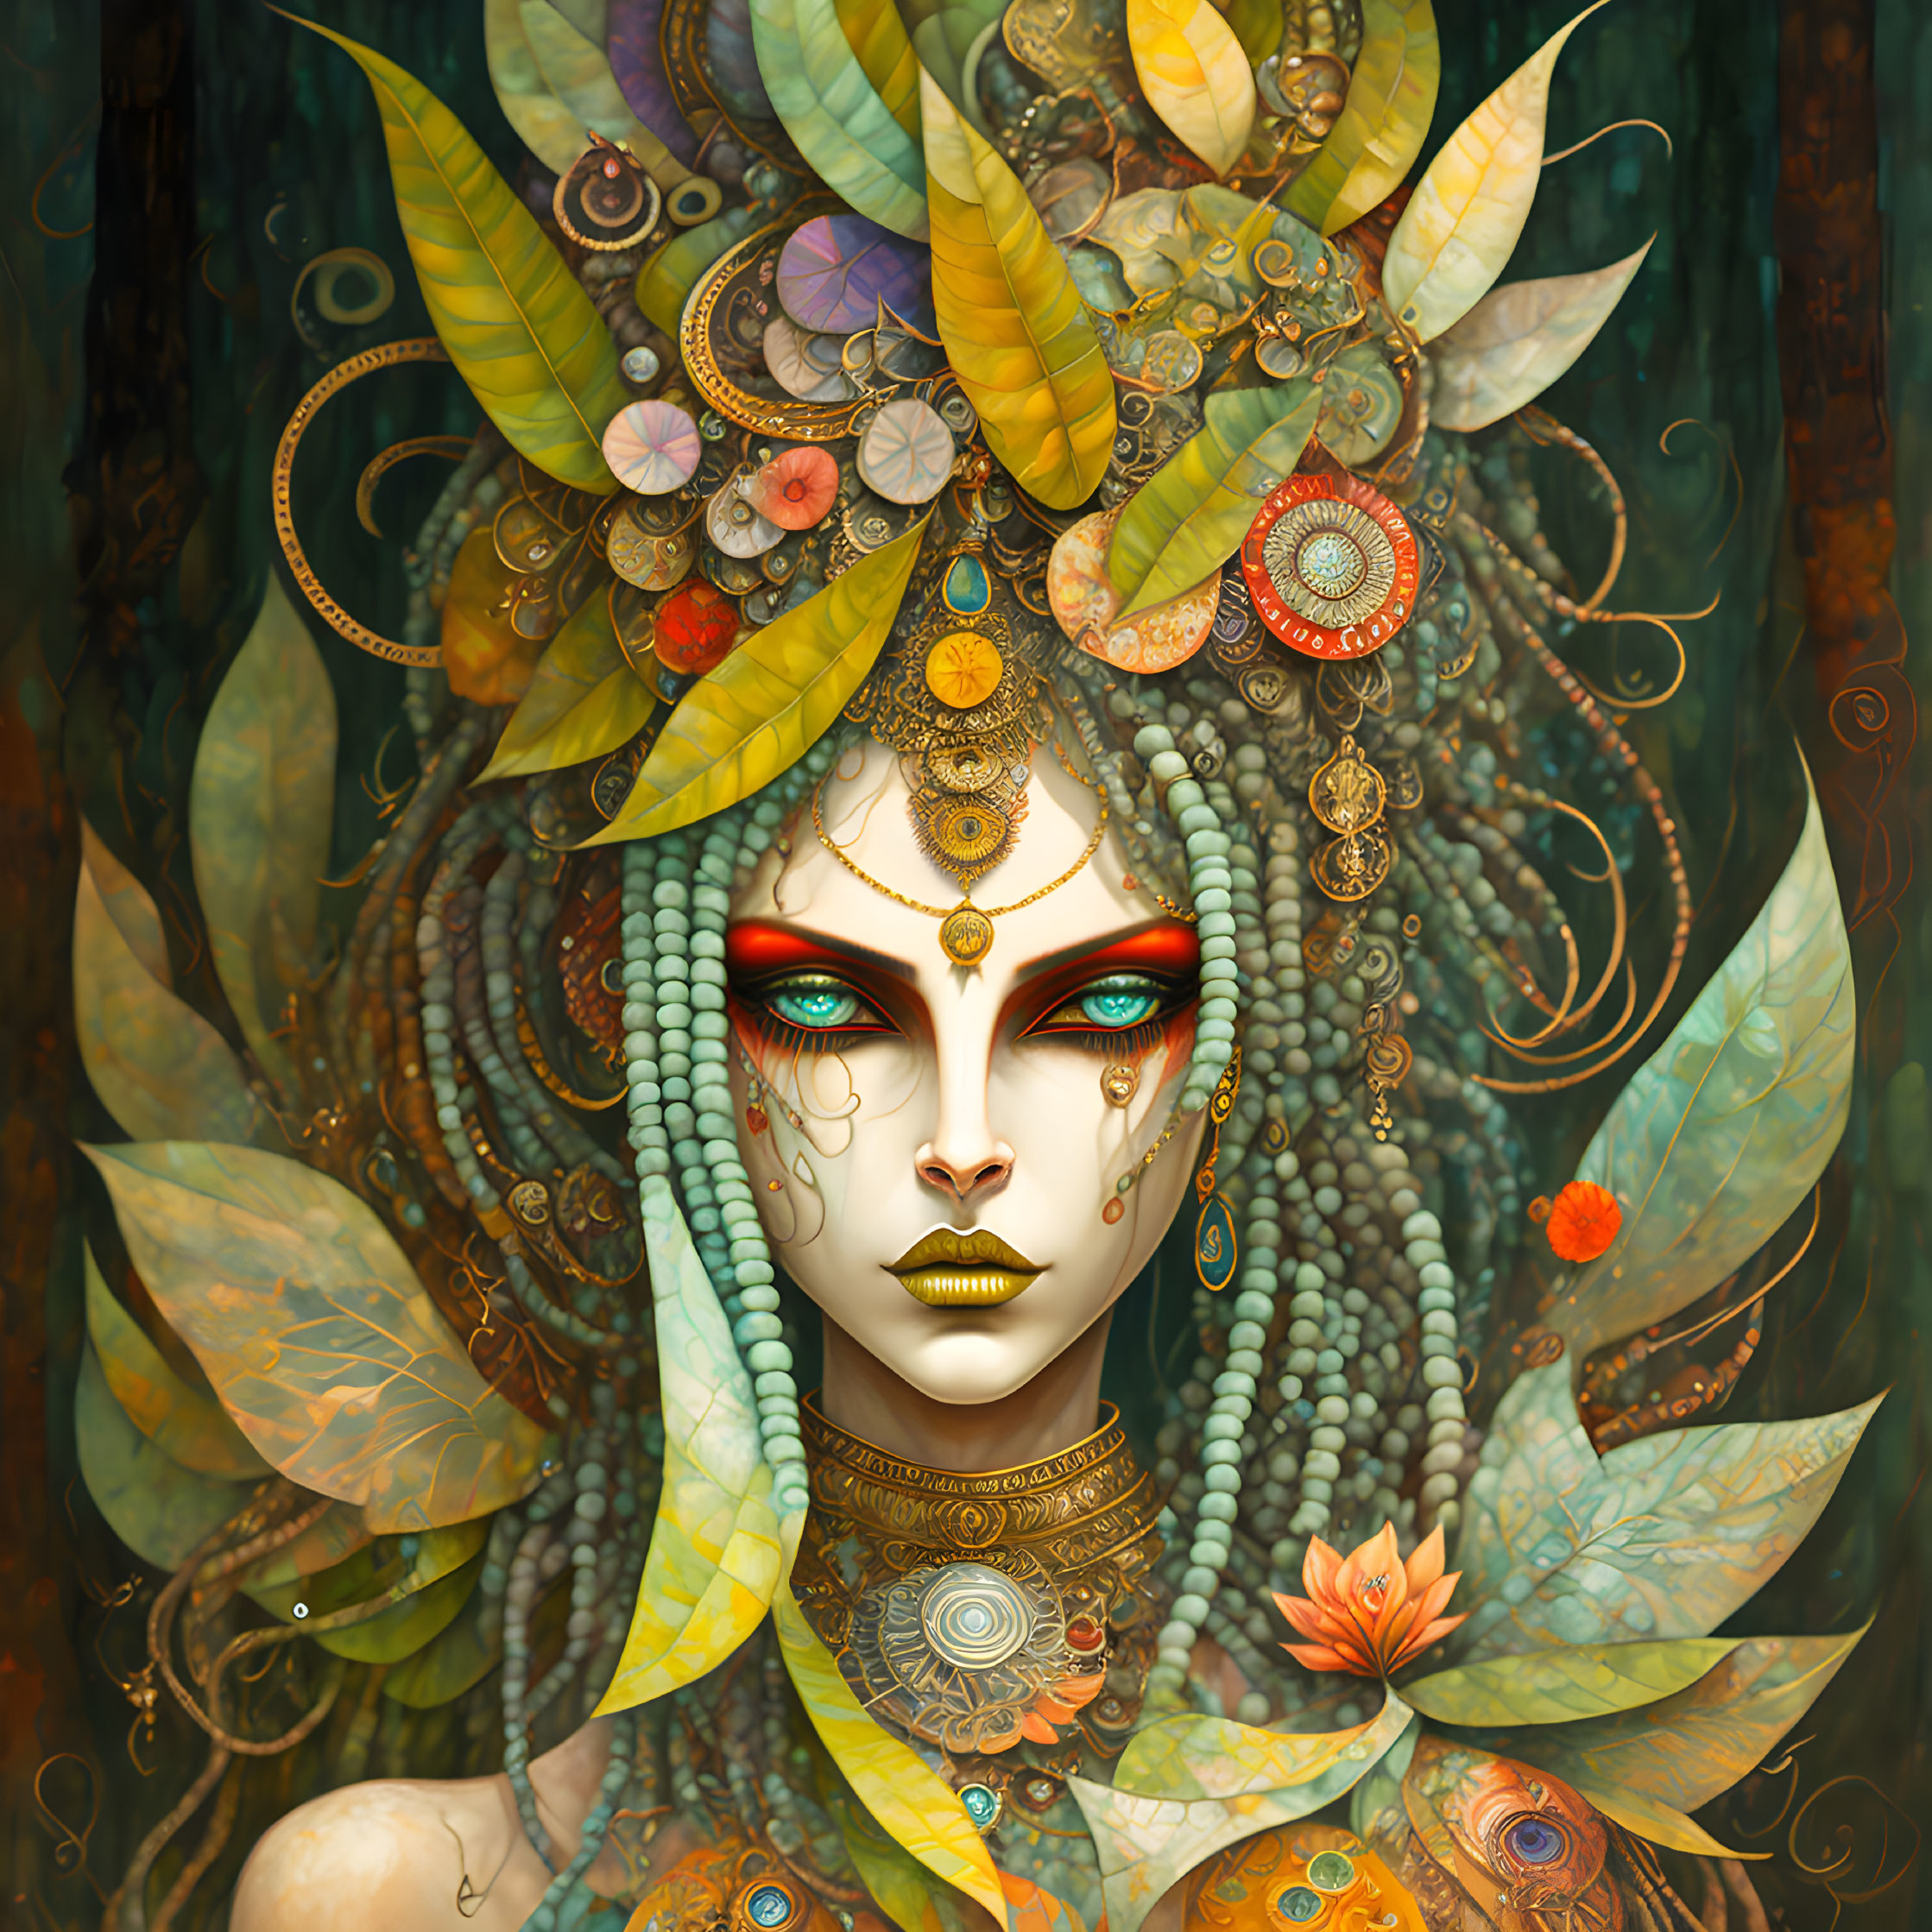 Mystical female figure with ornate jewelry in fantastical forest